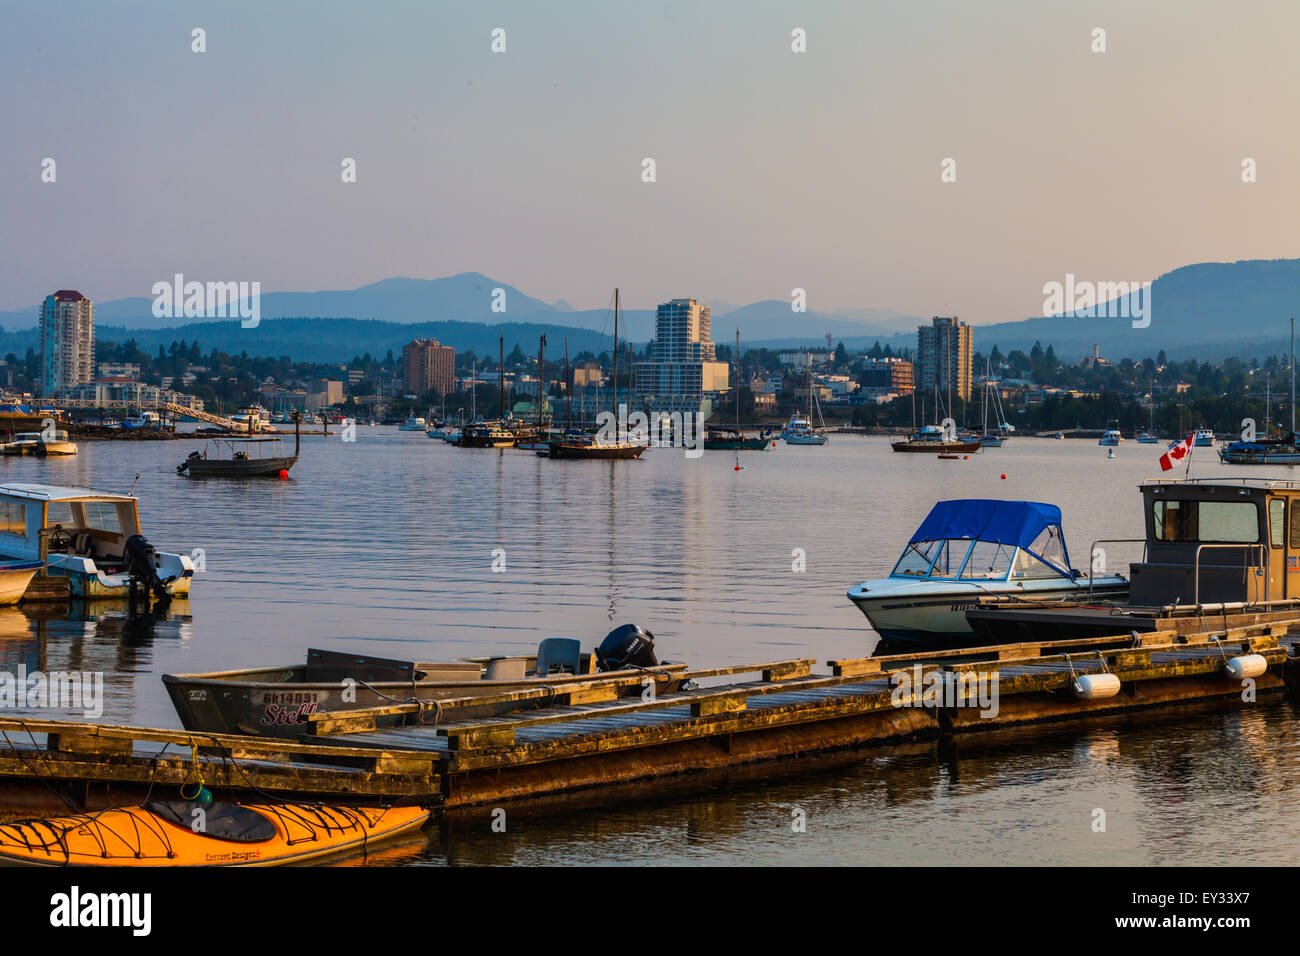 View of the city of Nanaimo from Protection Island, Canada Stock Photo